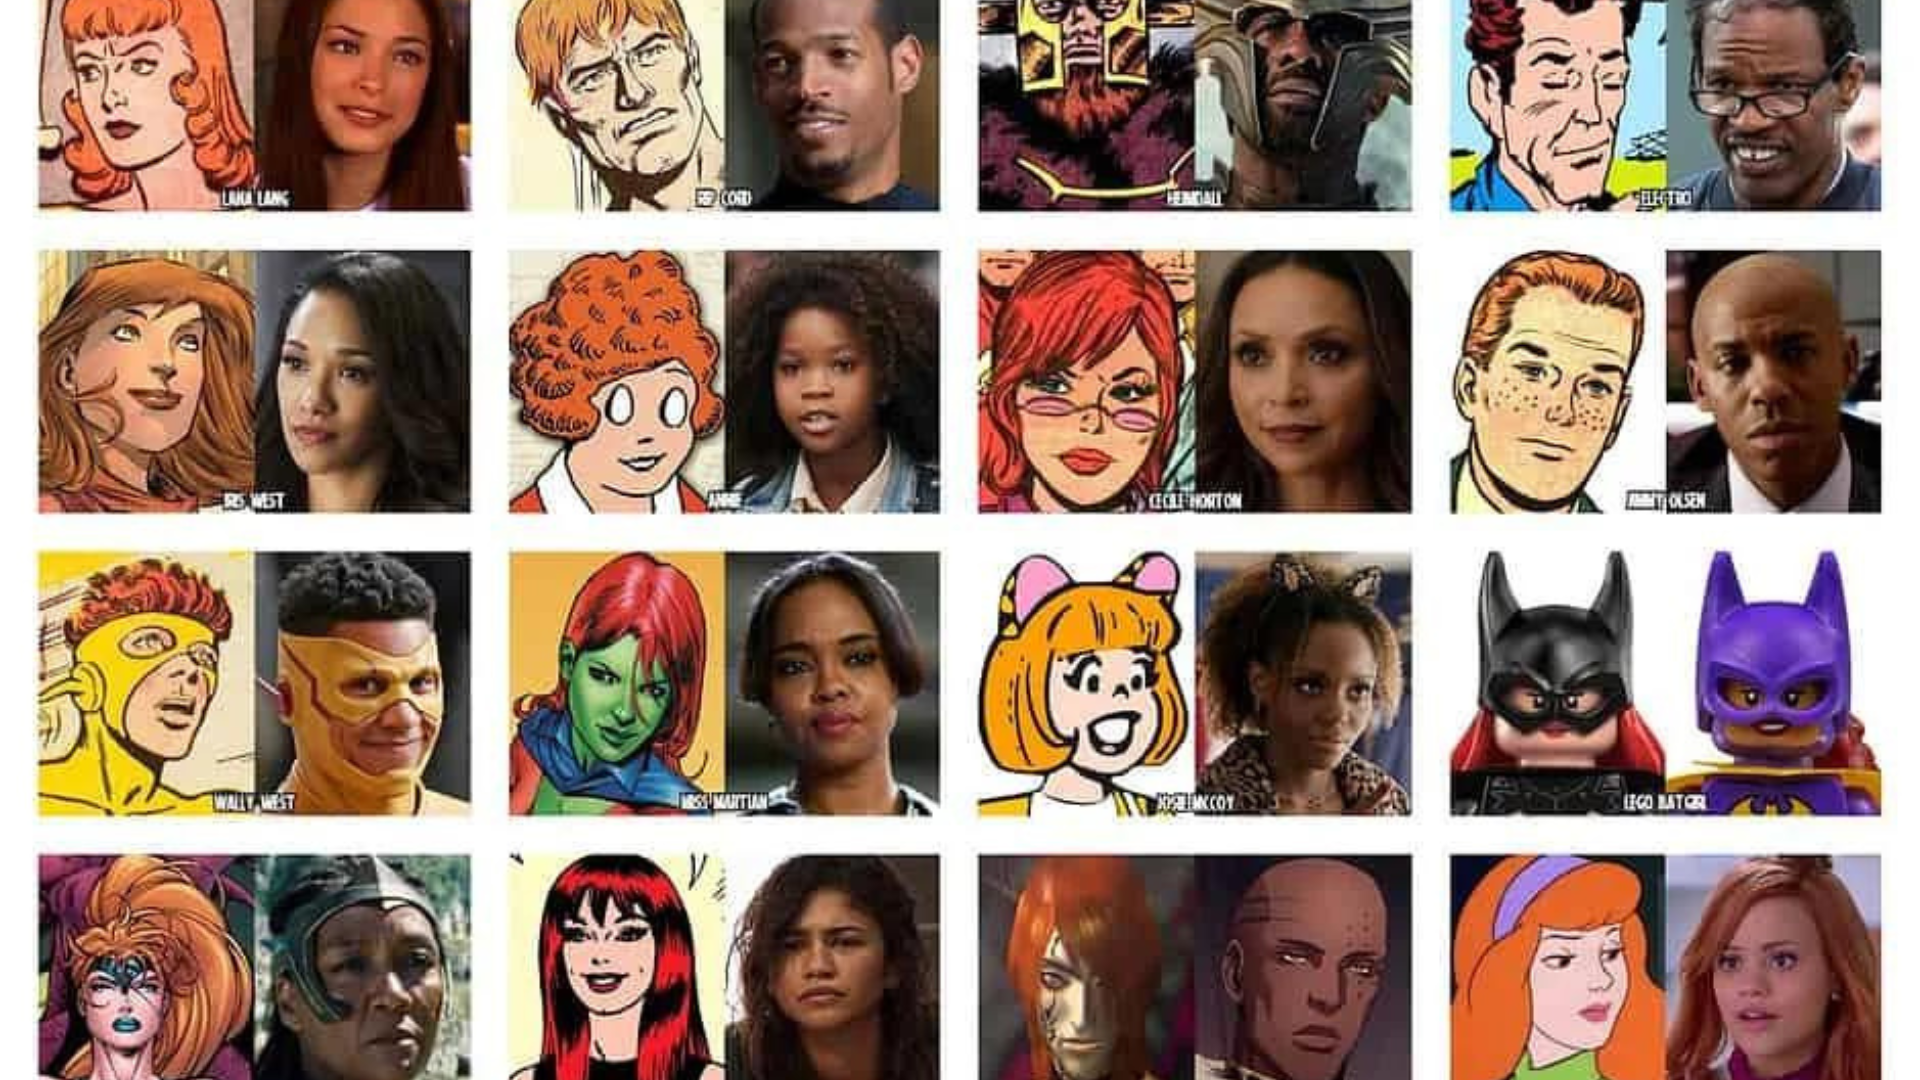 Reddit Thread: Recasting of Redheads Is a “Reasonable Artistic Decision”